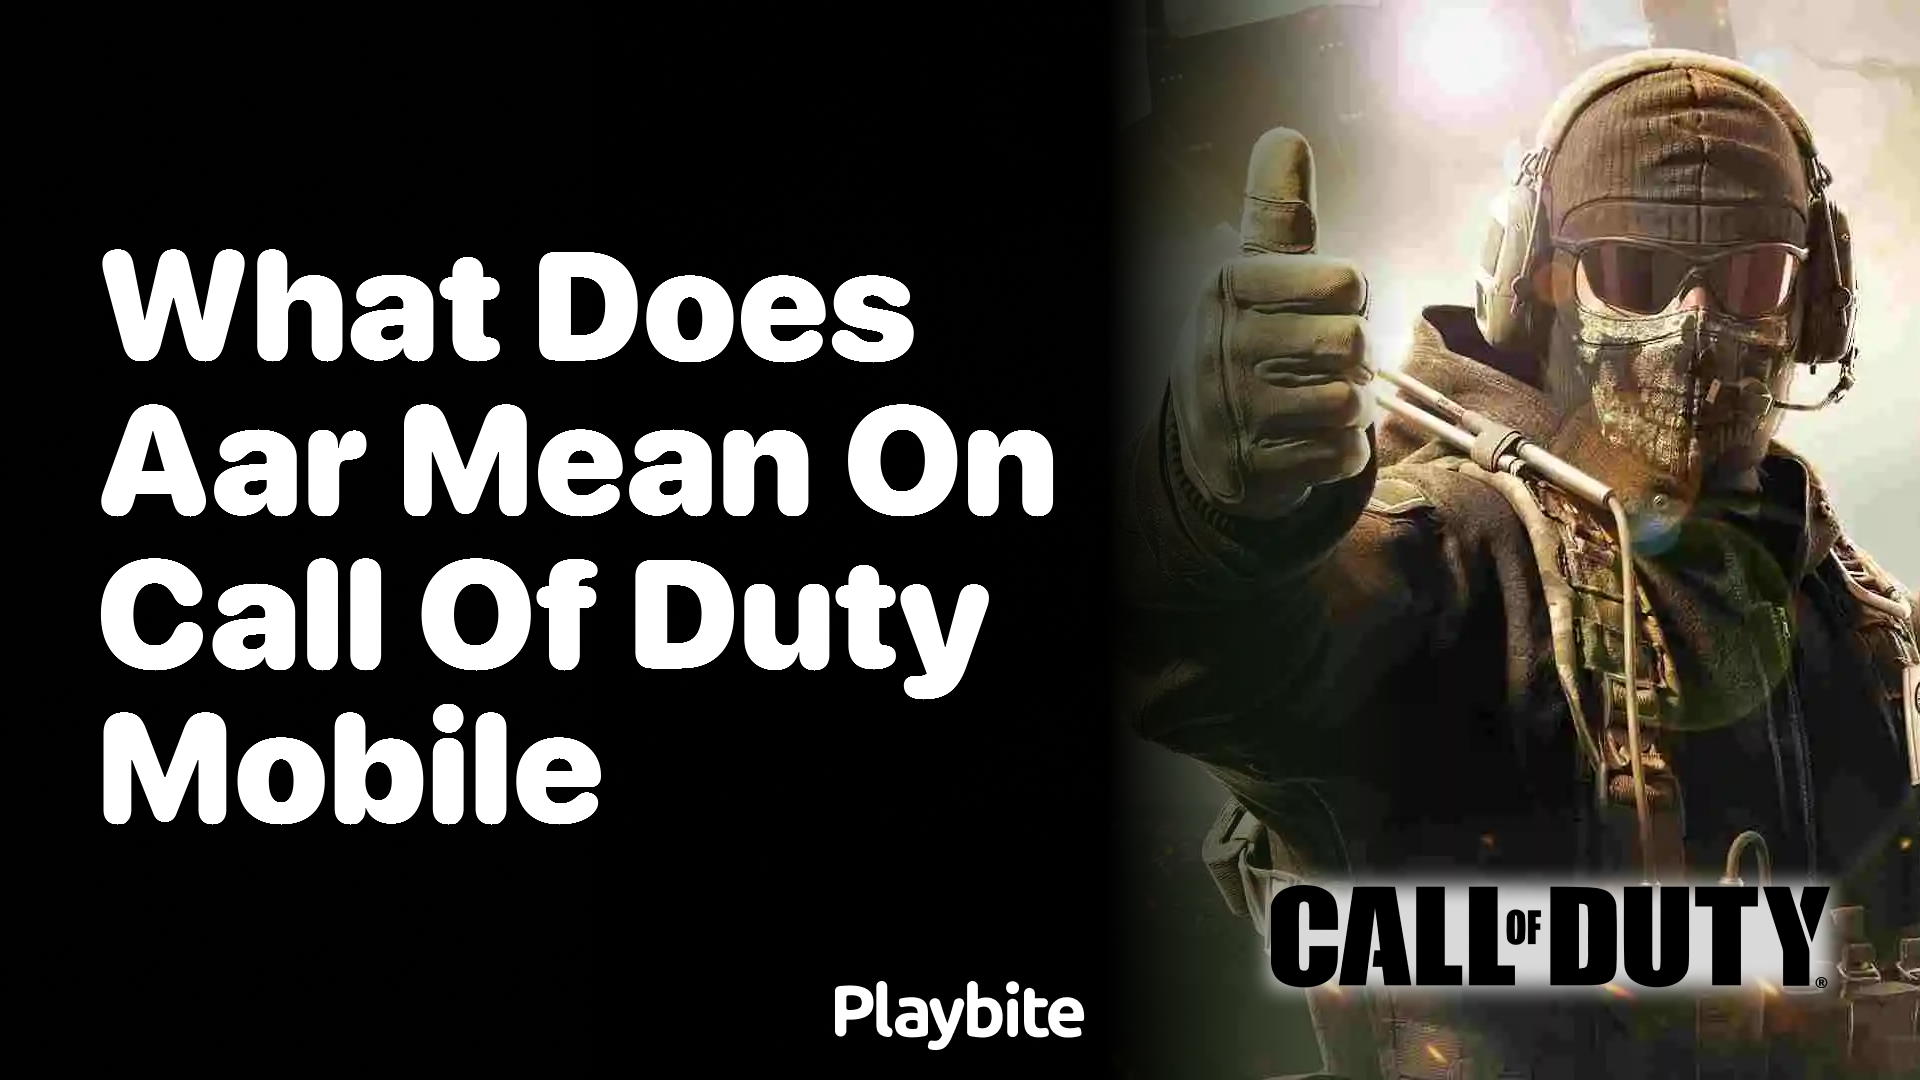 What Does AAR Mean on Call of Duty Mobile?